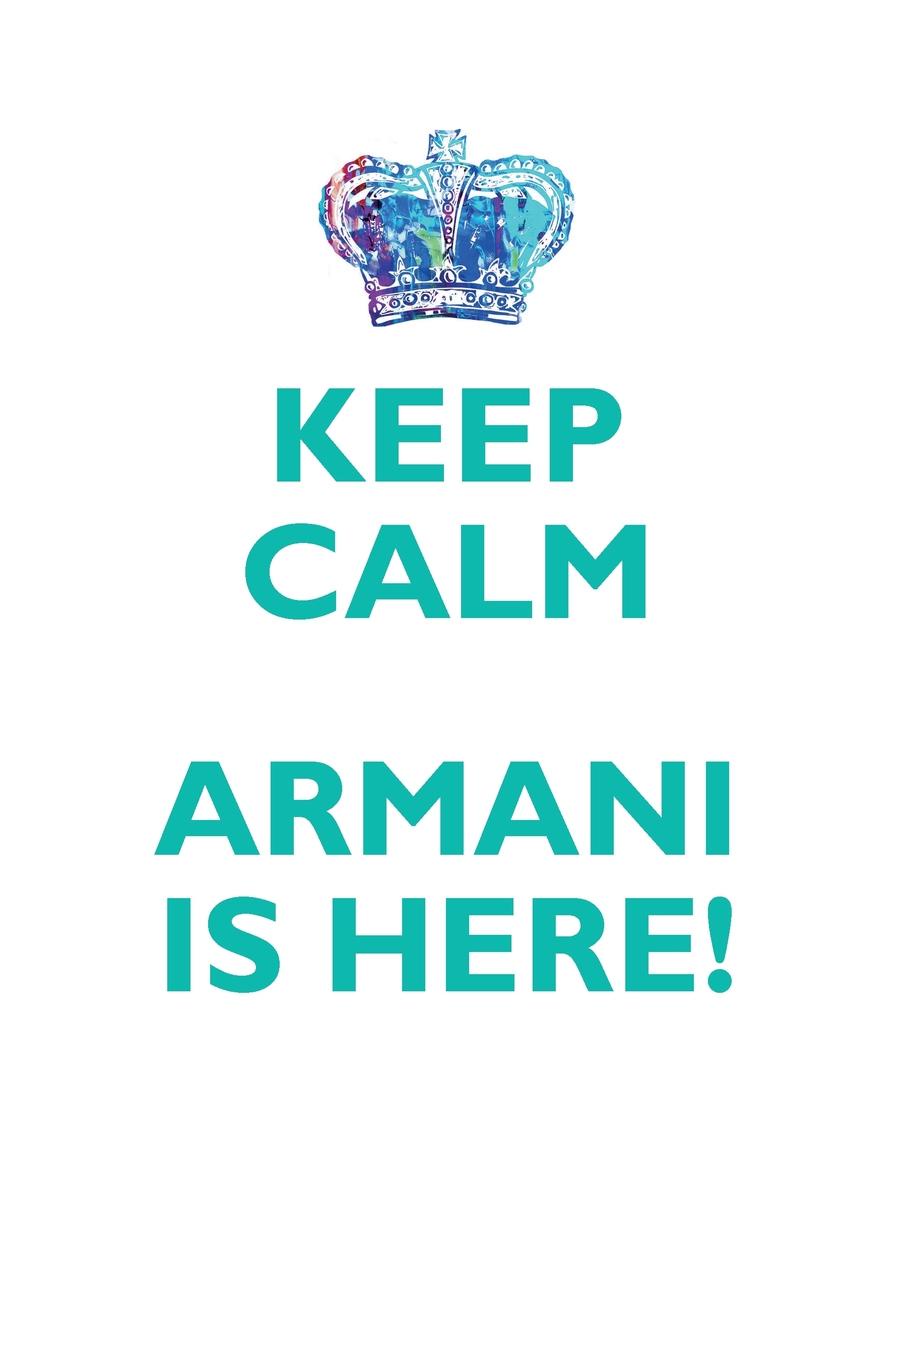 KEEP CALM, ARMANI IS HERE AFFIRMATIONS WORKBOOK Positive Affirmations Workbook Includes. Mentoring Questions, Guidance, Supporting You